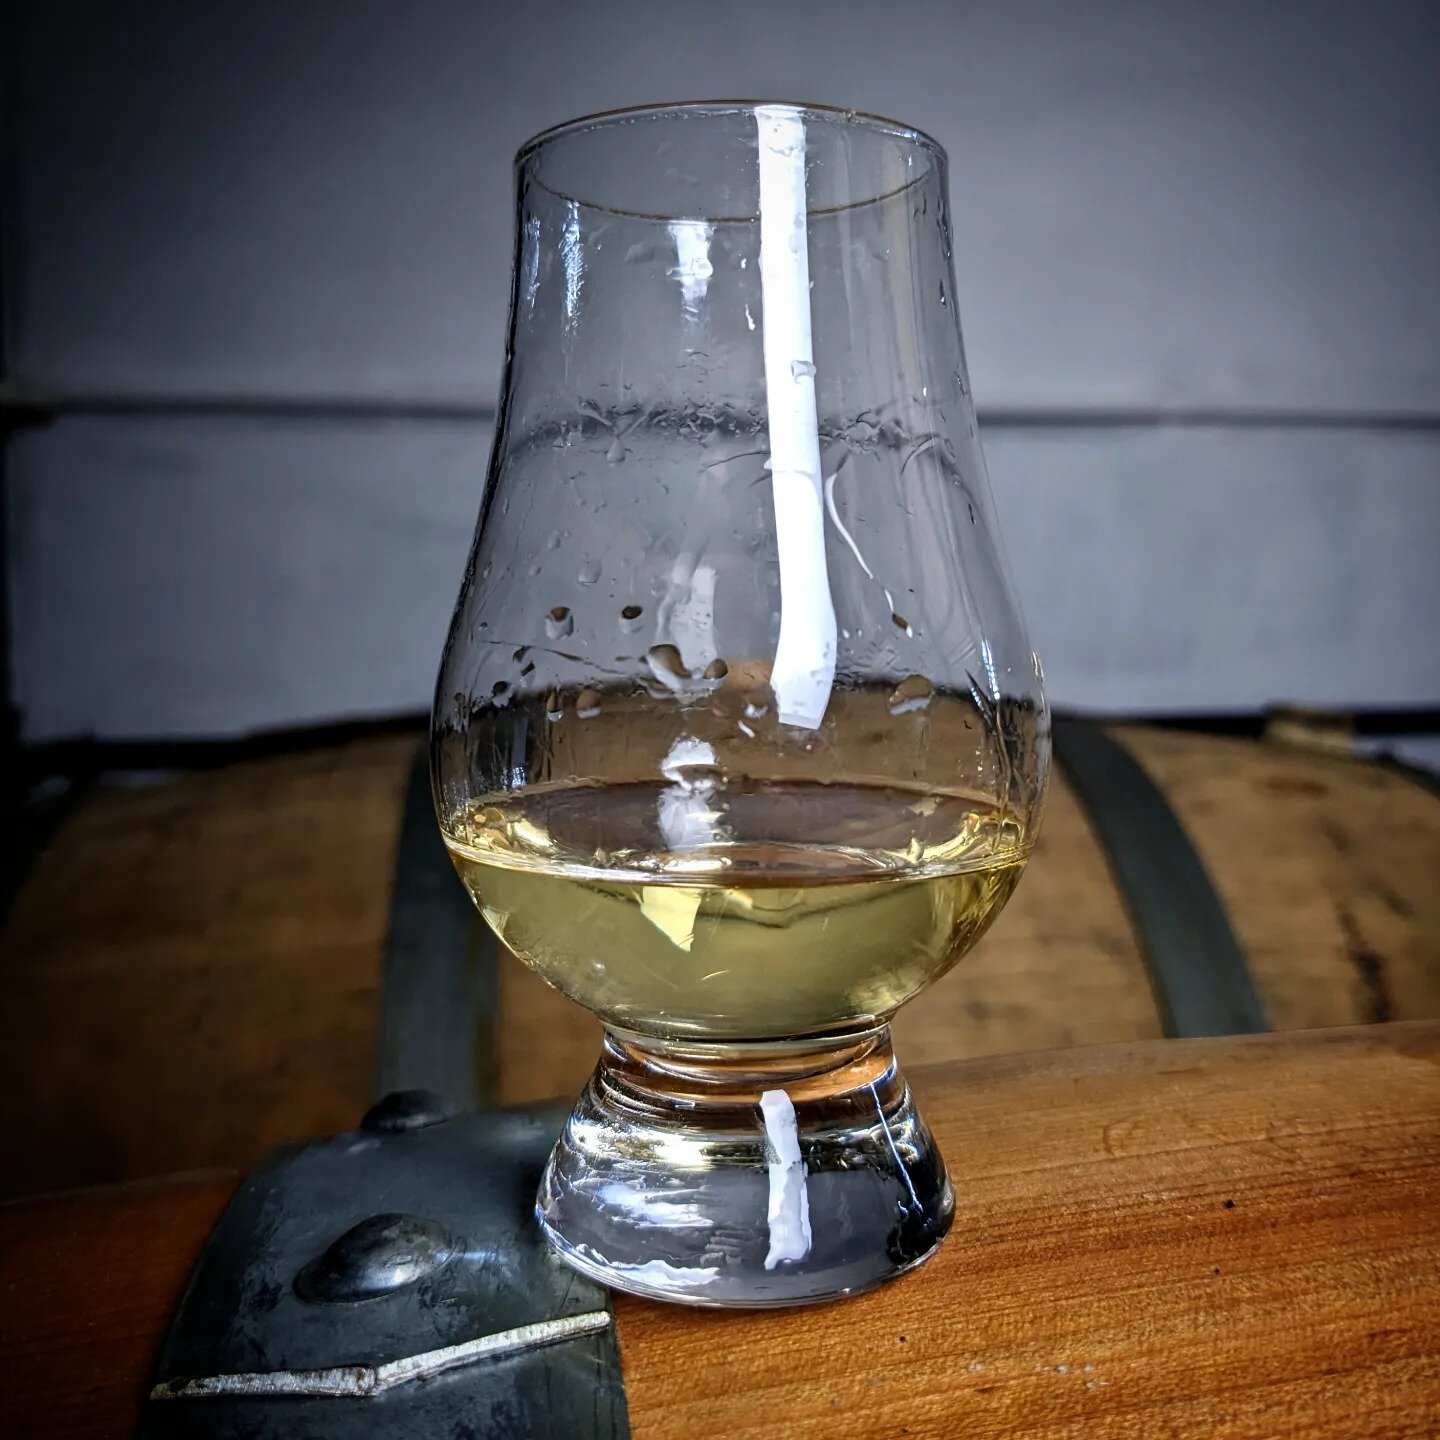 Cherry cask rum, still maturing, is showing promise. 

The flavor is influenced by cask age and type, with this particular rum being just 4 months old, and maturing in new wood. 

It's part of a series of unique casks we're developing, each offering 